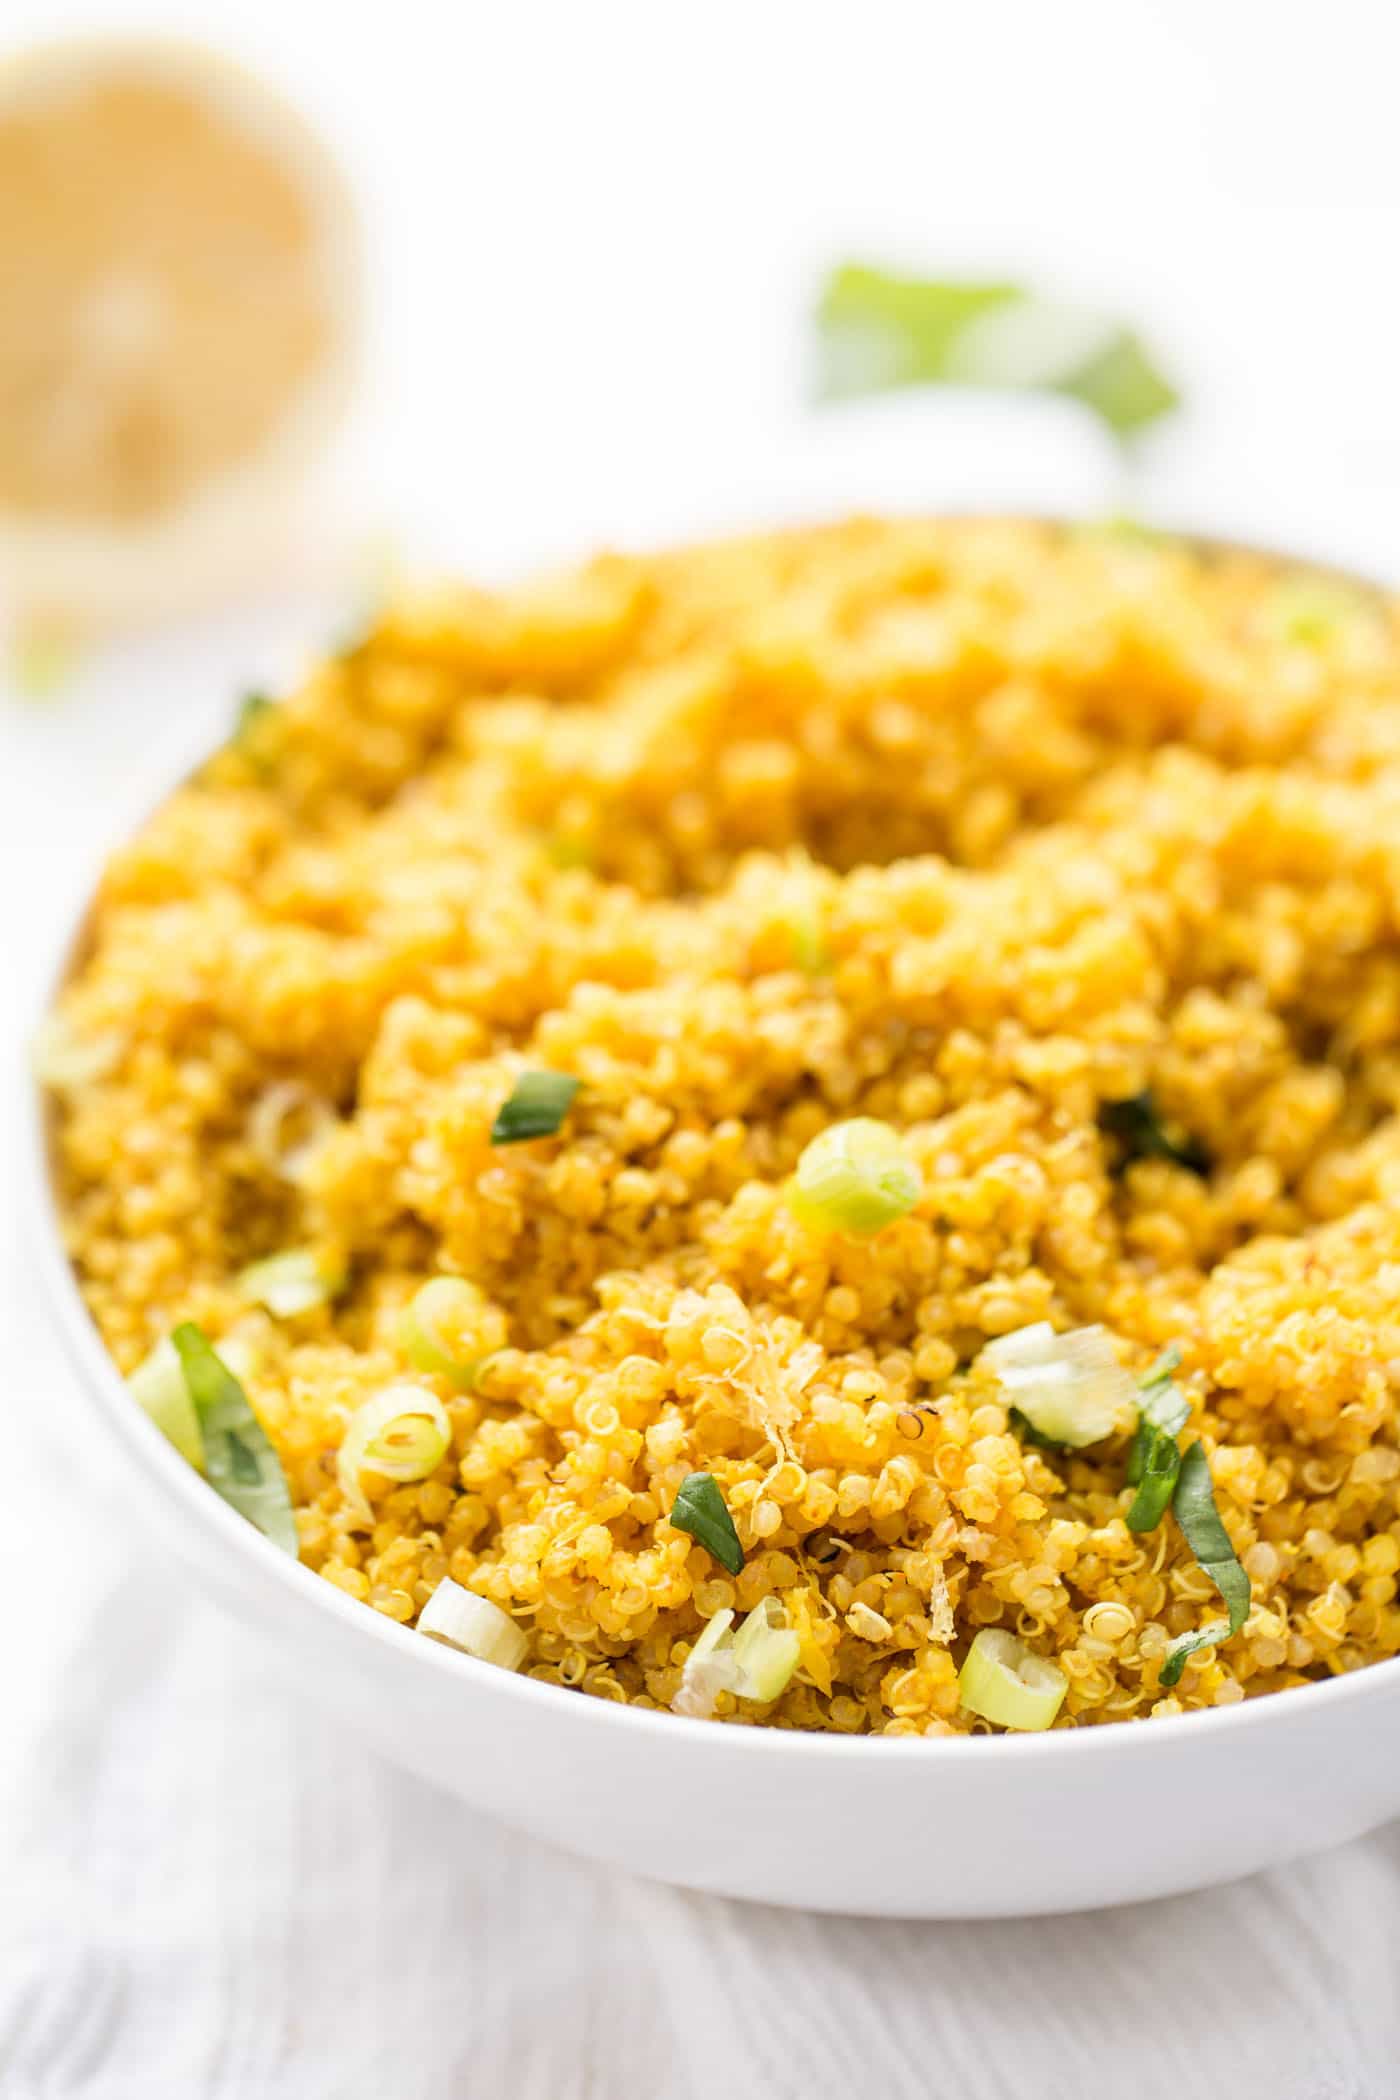 Lemon Turmeric Quinoa made with just 5 INGREDIENTS! So simple and the perfect way to spice up your next Indian or Middle Eastern feast!